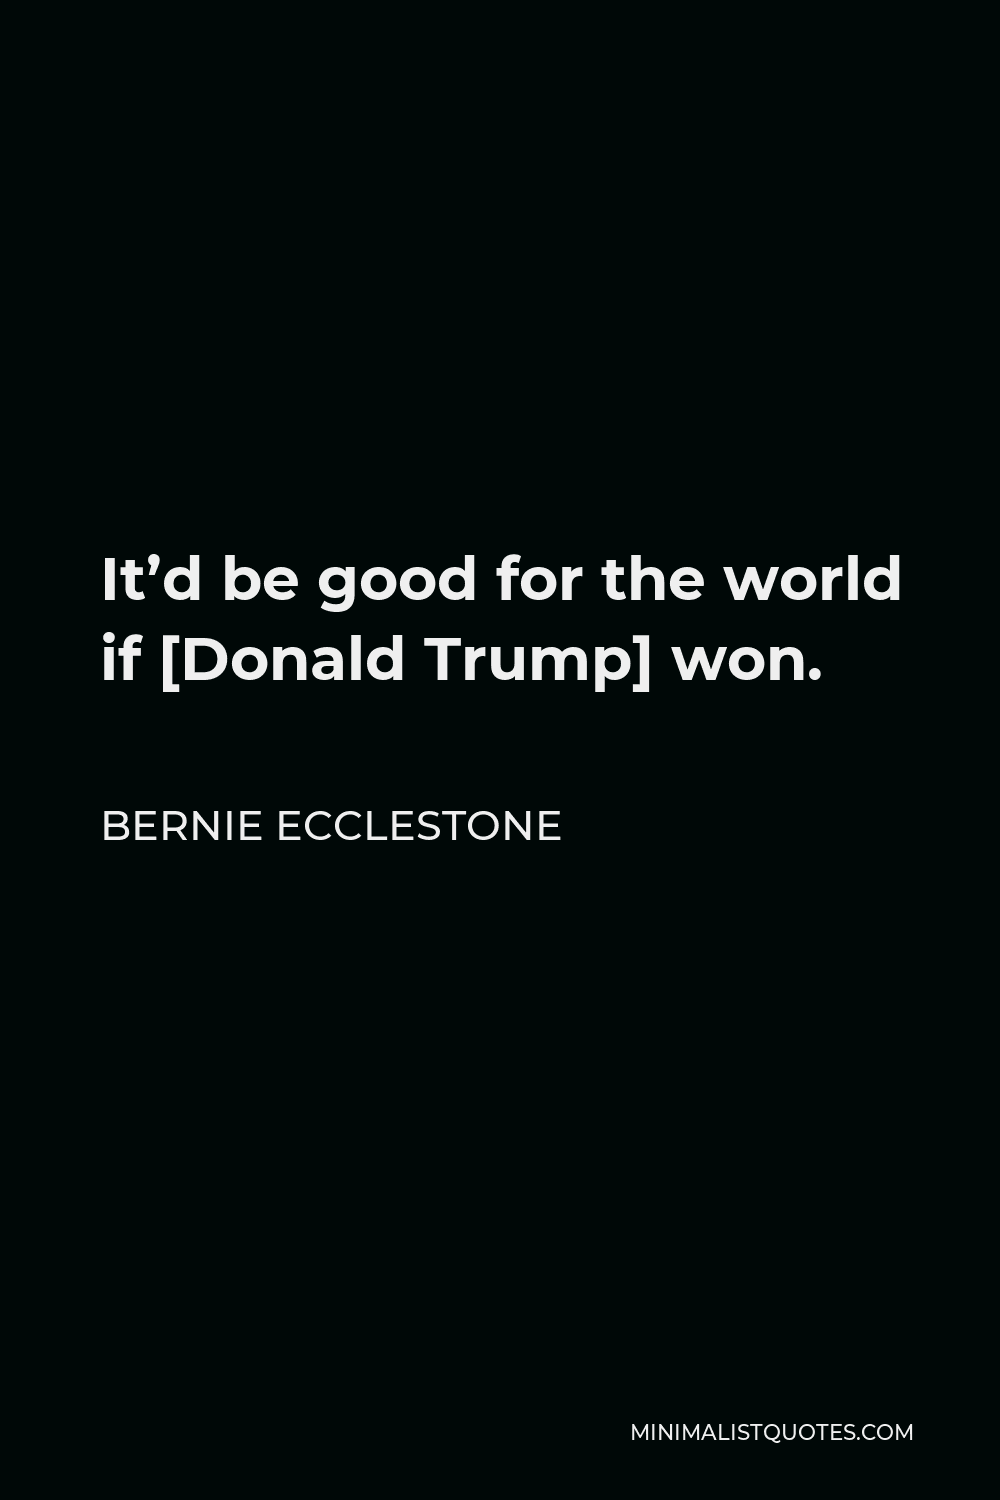 Bernie Ecclestone Quote - It’d be good for the world if [Donald Trump] won.